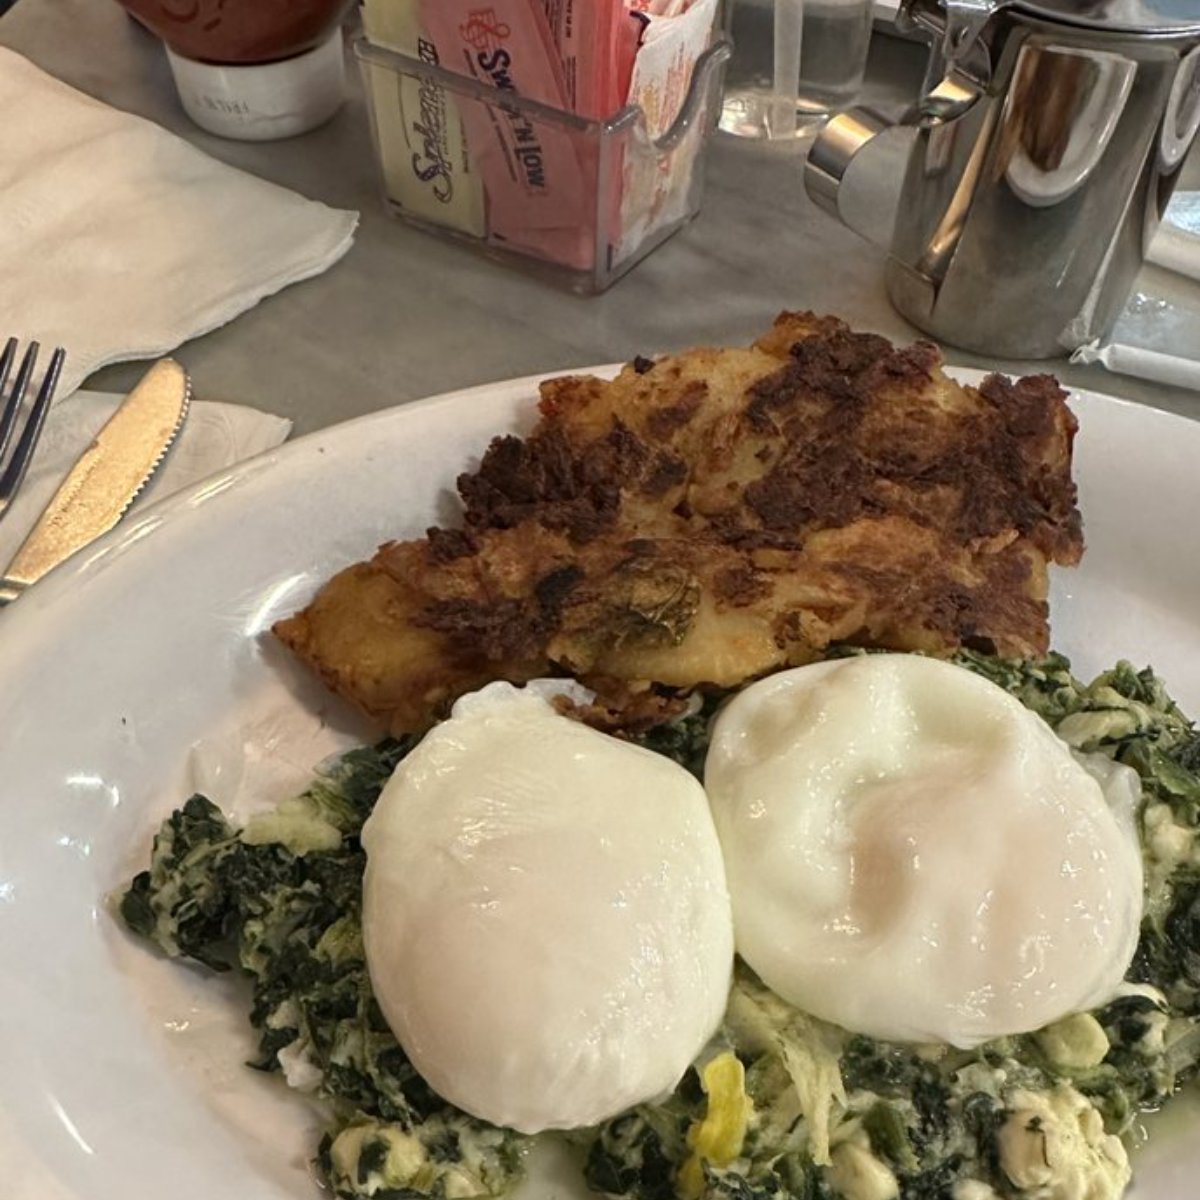 Suddenly craving breakfast? From our perfectly prepared Eggs Florentine to omelettes, steak and eggs, and more, our menu is packed with early morning favorites sure to satisfy your hearty appetite! #CafeLukaNYC #EatLocal #FamilyOwned #sangria #NYCFoodie